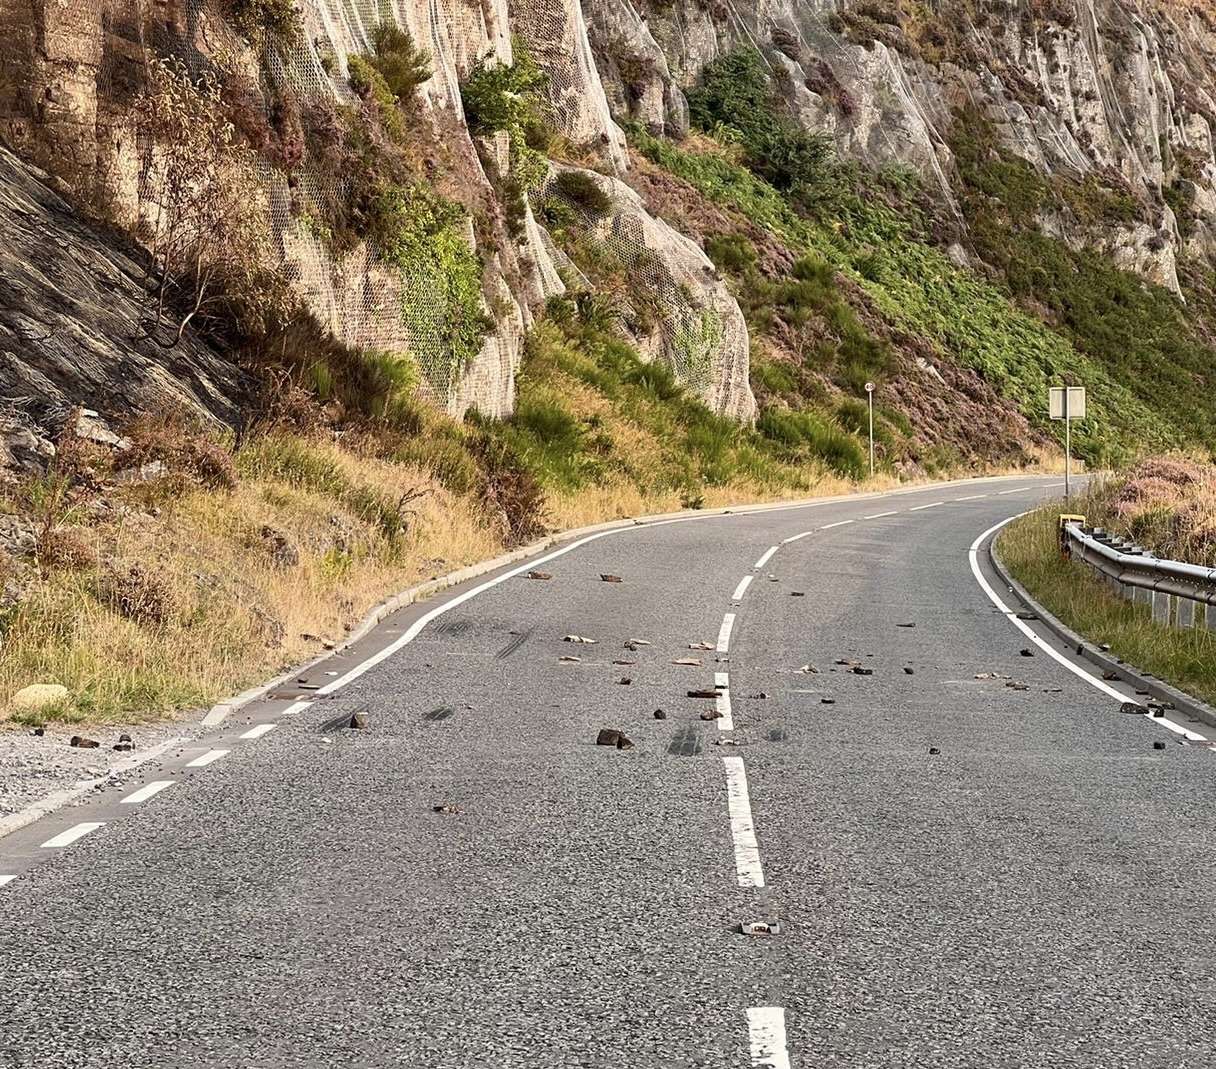 Rhigos Mountain Road closed as council works to repair fire damage